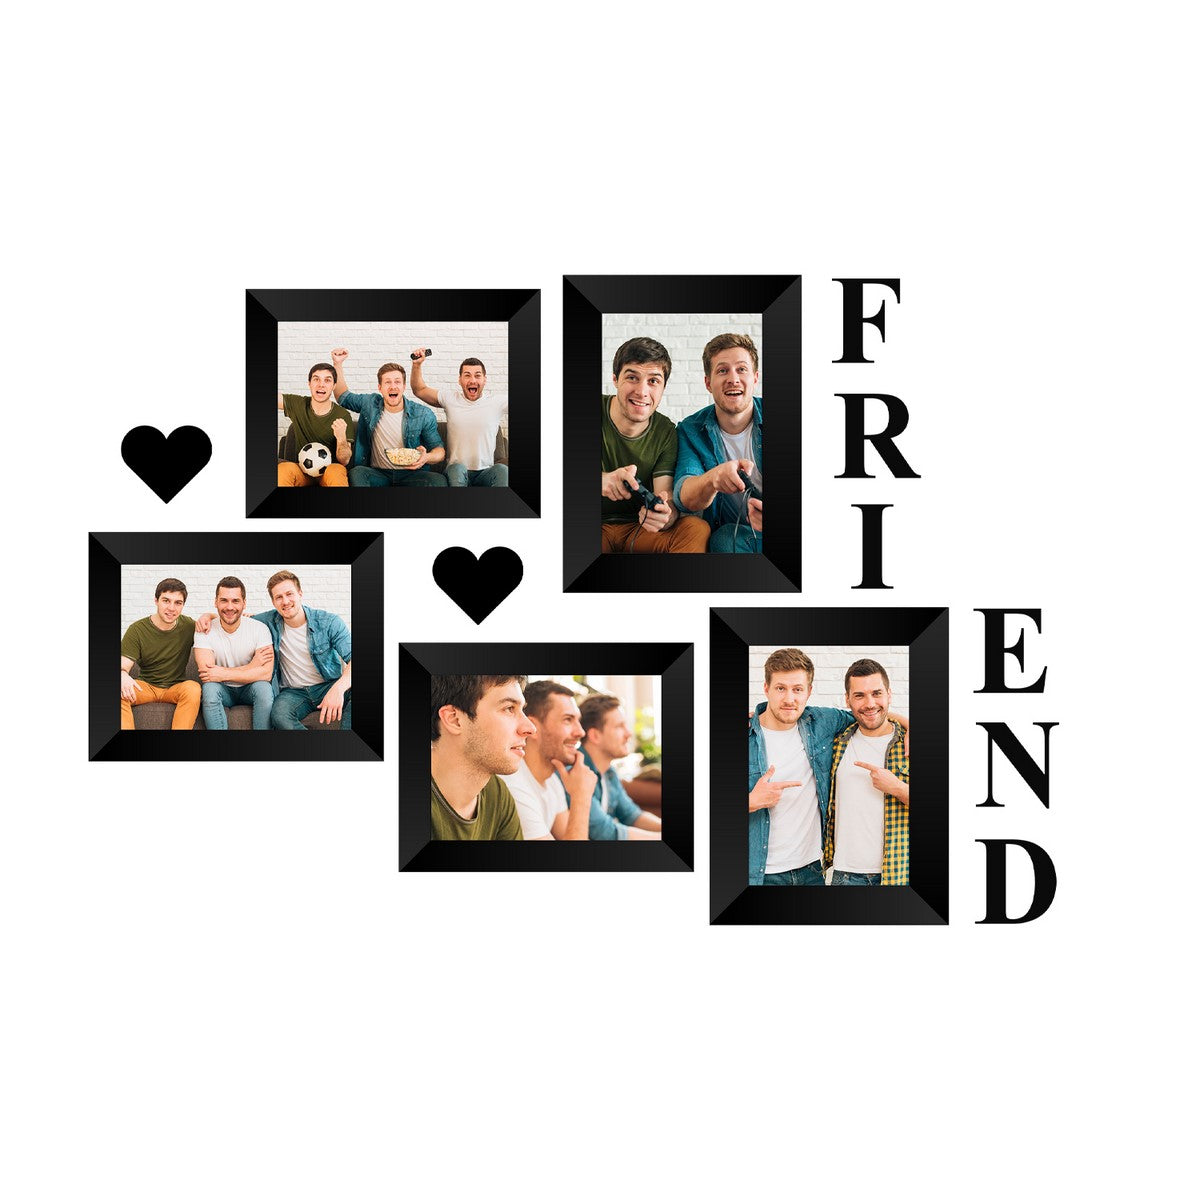 Memory Wall Collage Photo Frame - Set of 5 Photo Frames for 3 Photos of 4"x6", 2 Photos of 5"x7", 1 Piece of FRIENDS, 2 Pieces of HEARTS